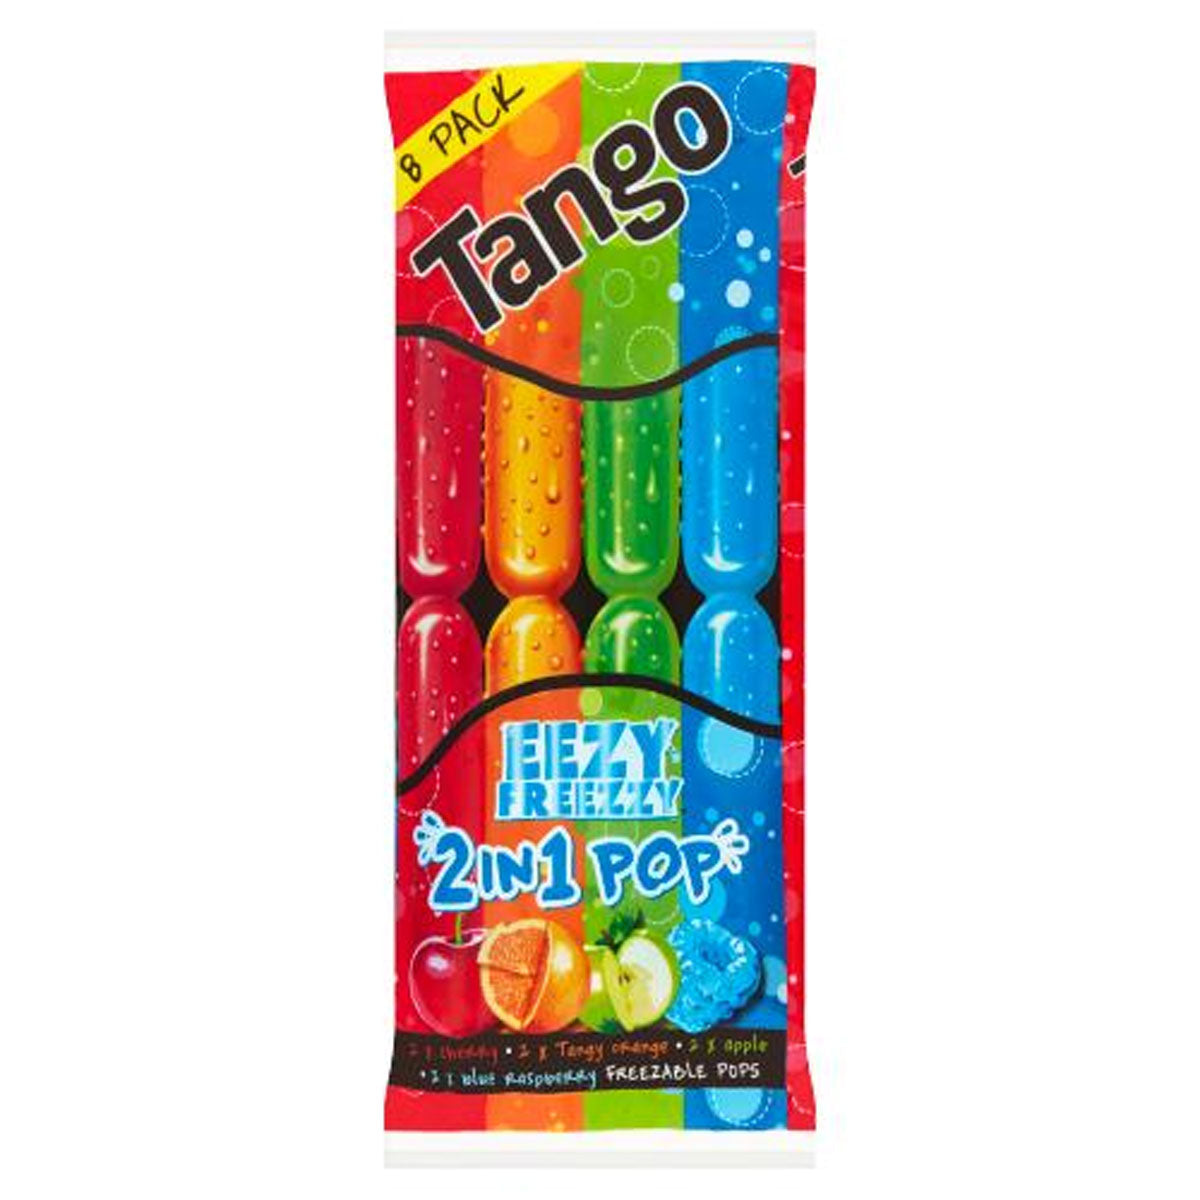 A package of Tango - 2 in 1 Freeze Pops - 600ml.